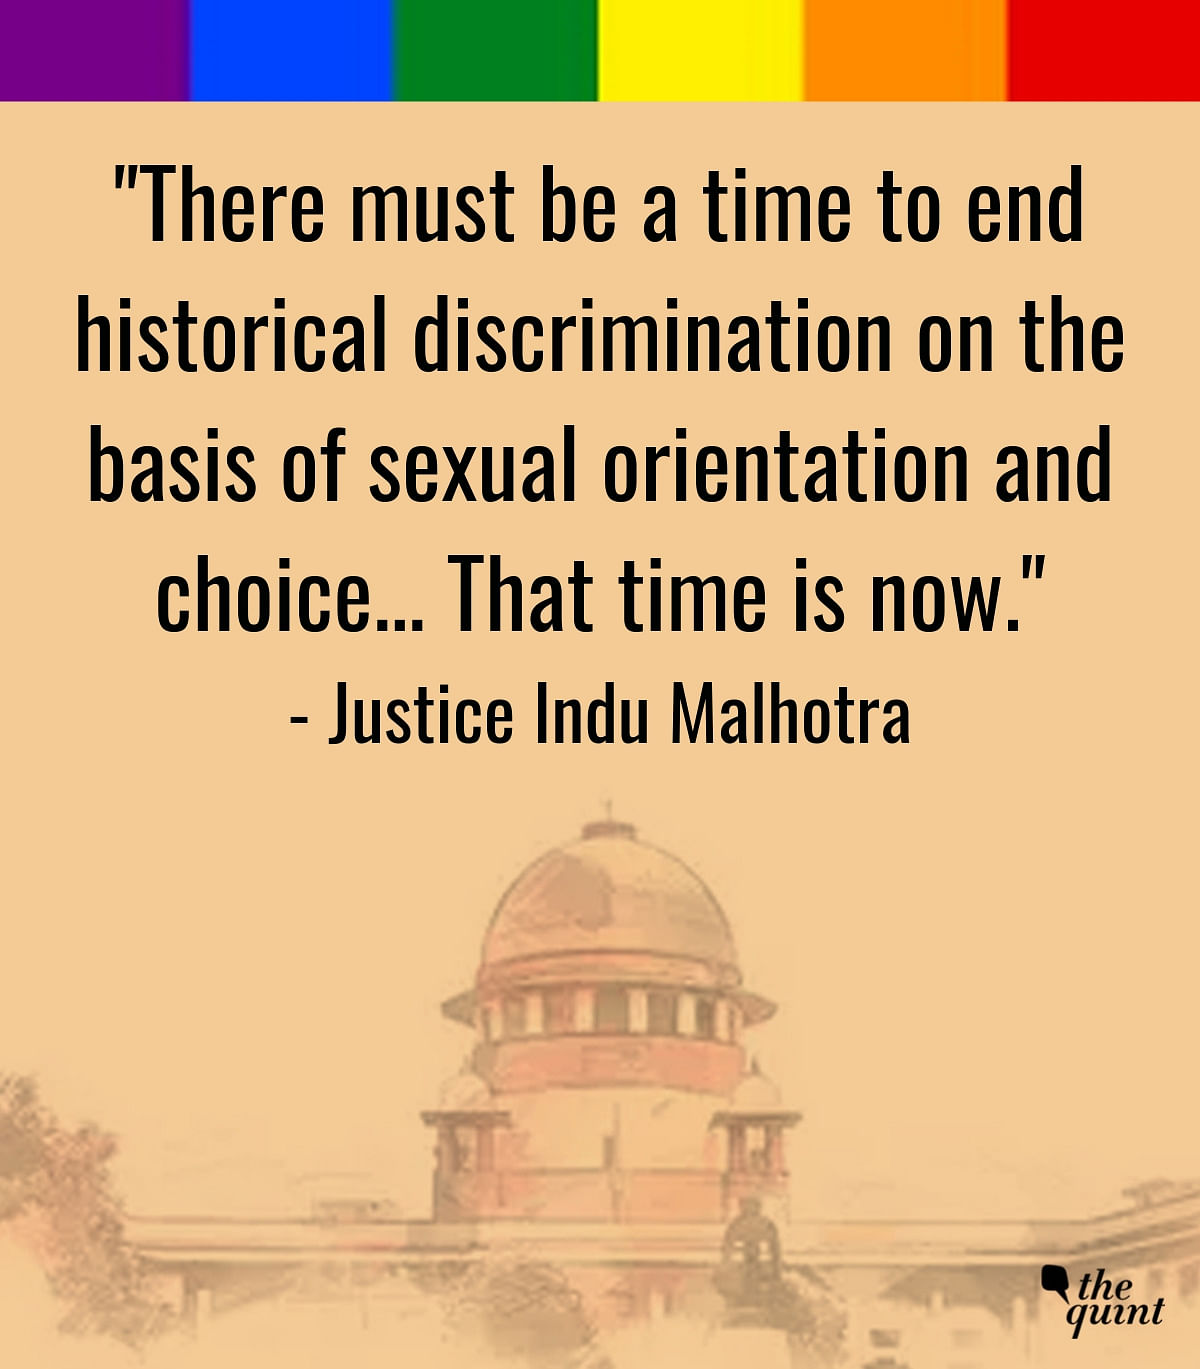 Read the most powerful quotes from the Justices of the Supreme Court of India on Section 377.